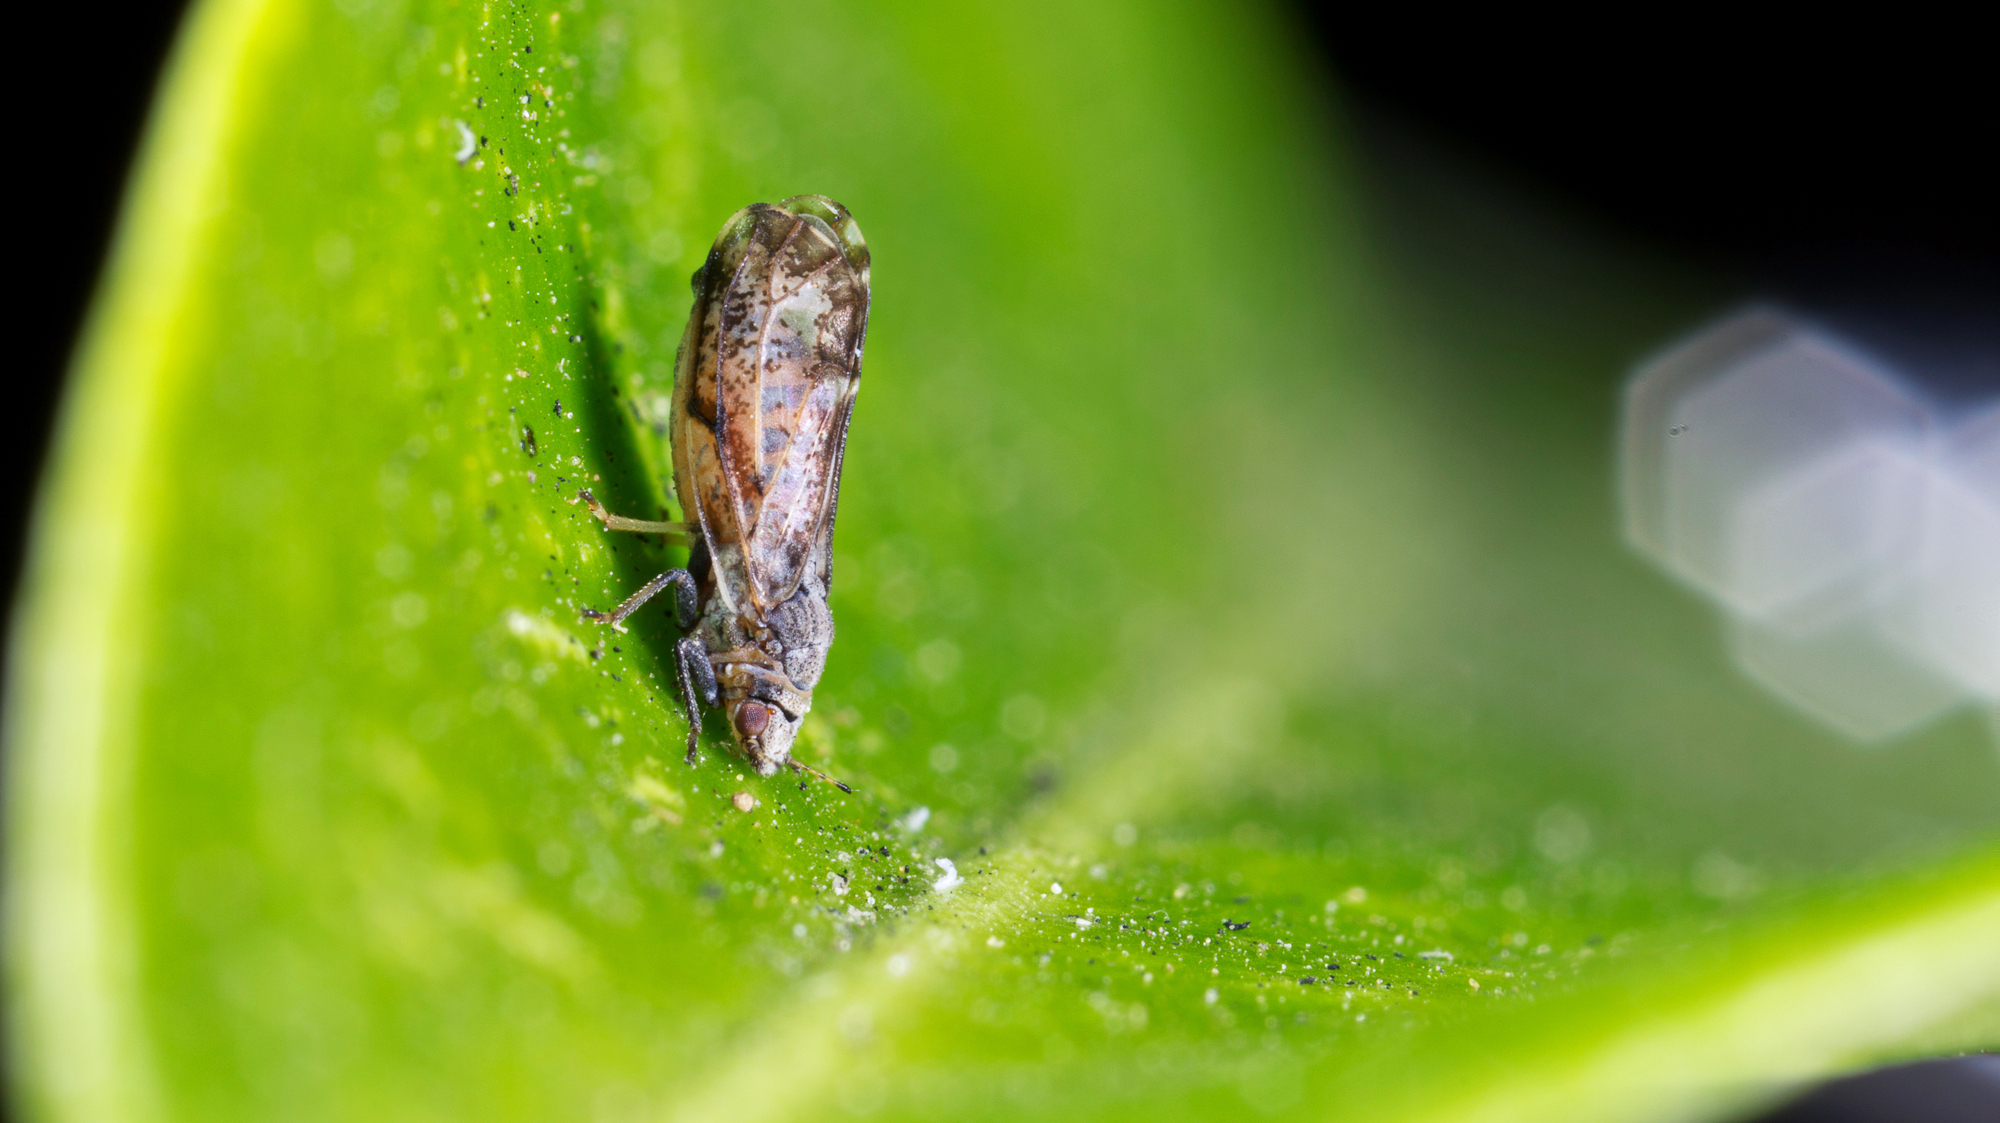 The parasitic wasp Tamarixia radiata is the natural enemy of the invasive Asian citrus psyllid. Photo: Mike Lewis/Center for Invasive Species Research, UC Riverside